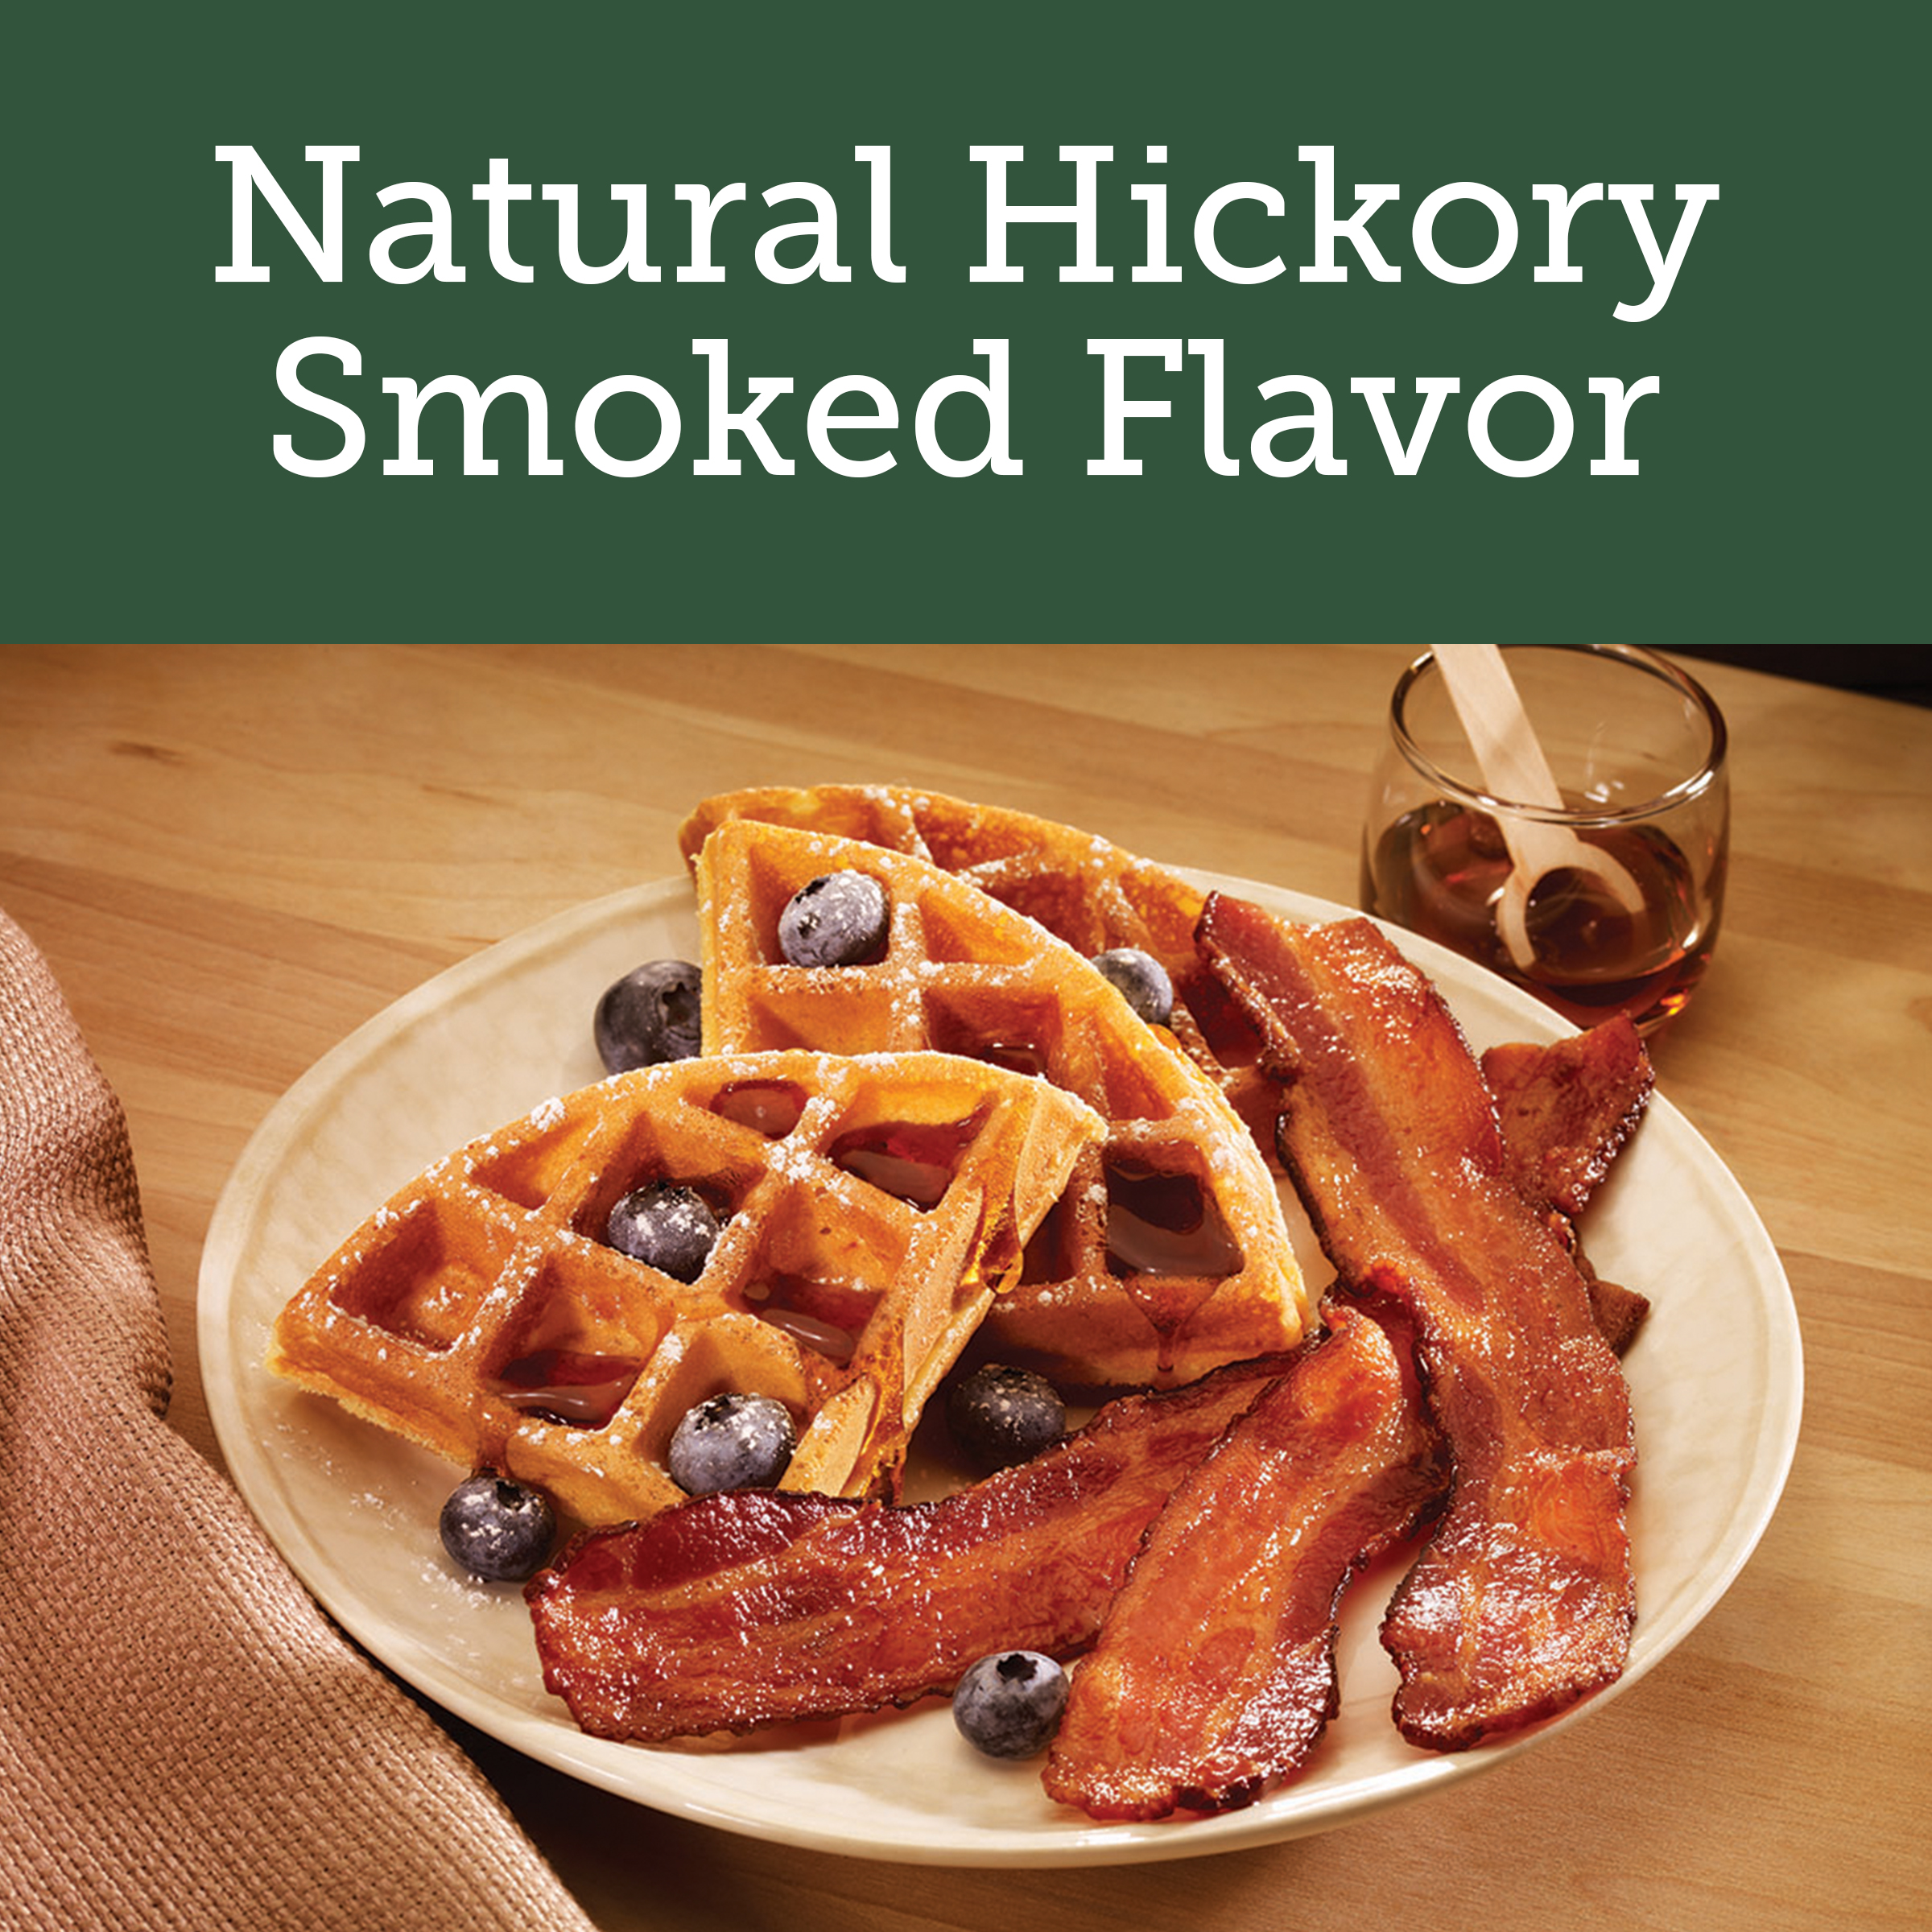 Smithfield All Natural Uncured Hickory Smoked Bacon, 12 oz - image 3 of 9